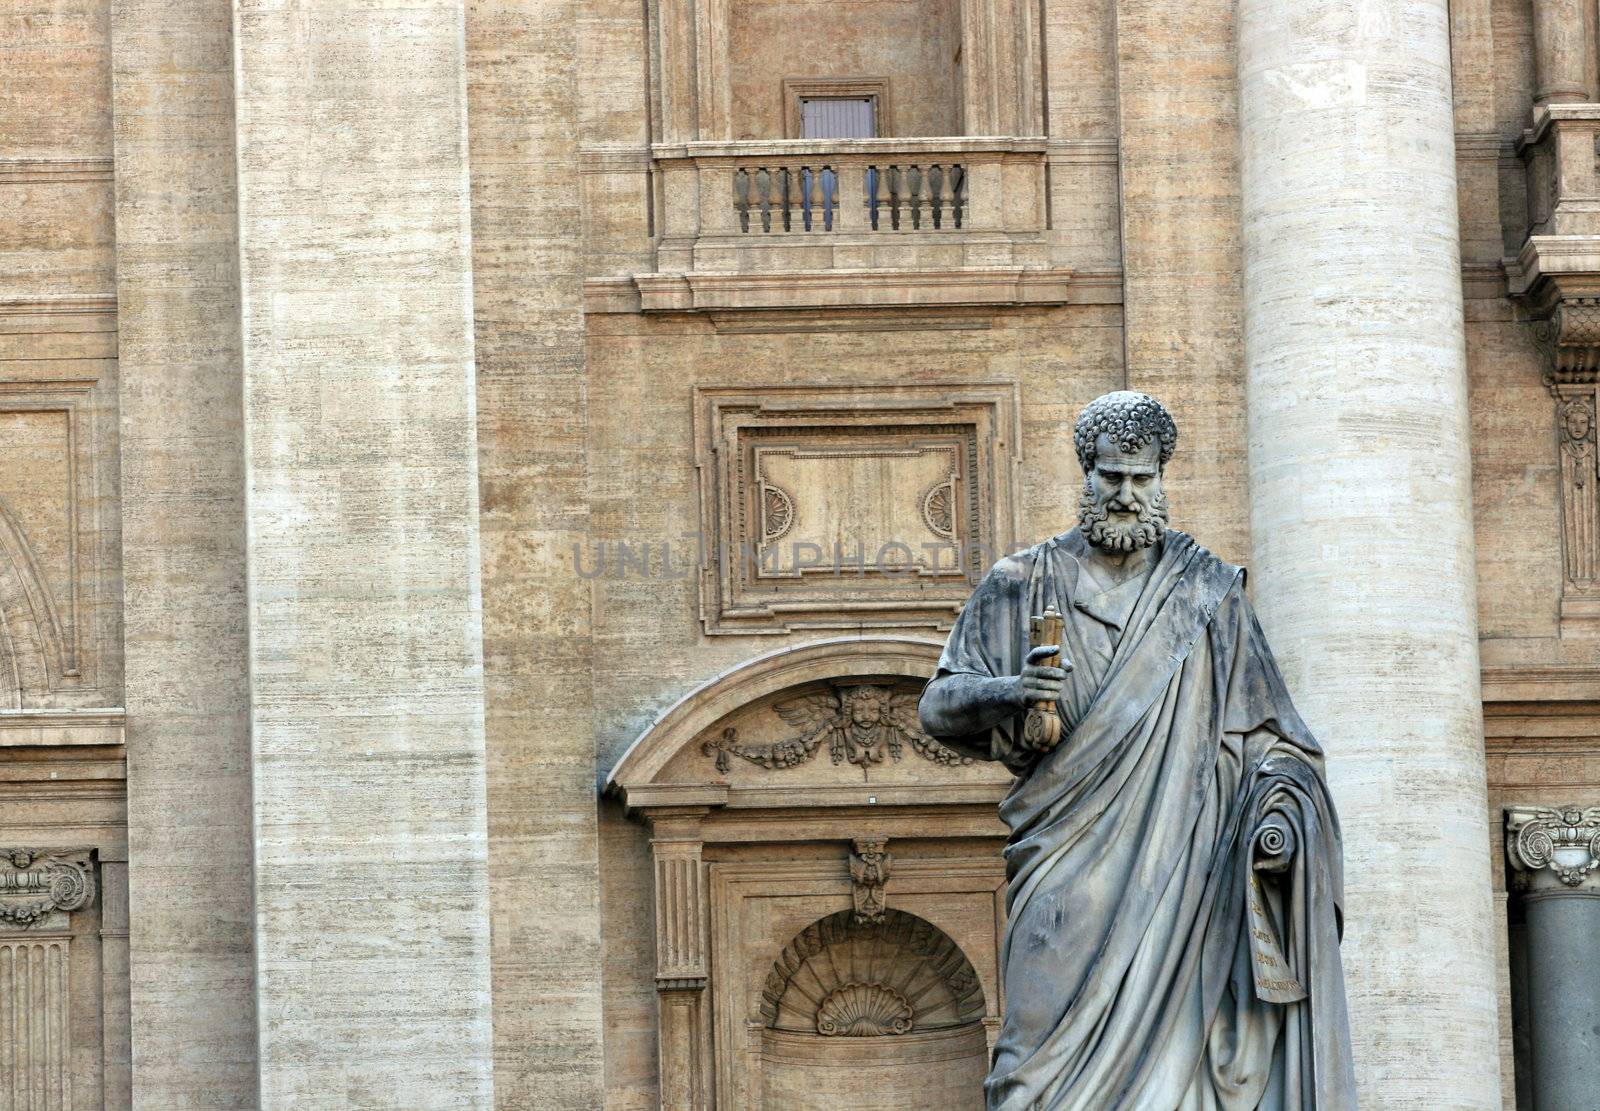 St. Peter at the Vatican by keki